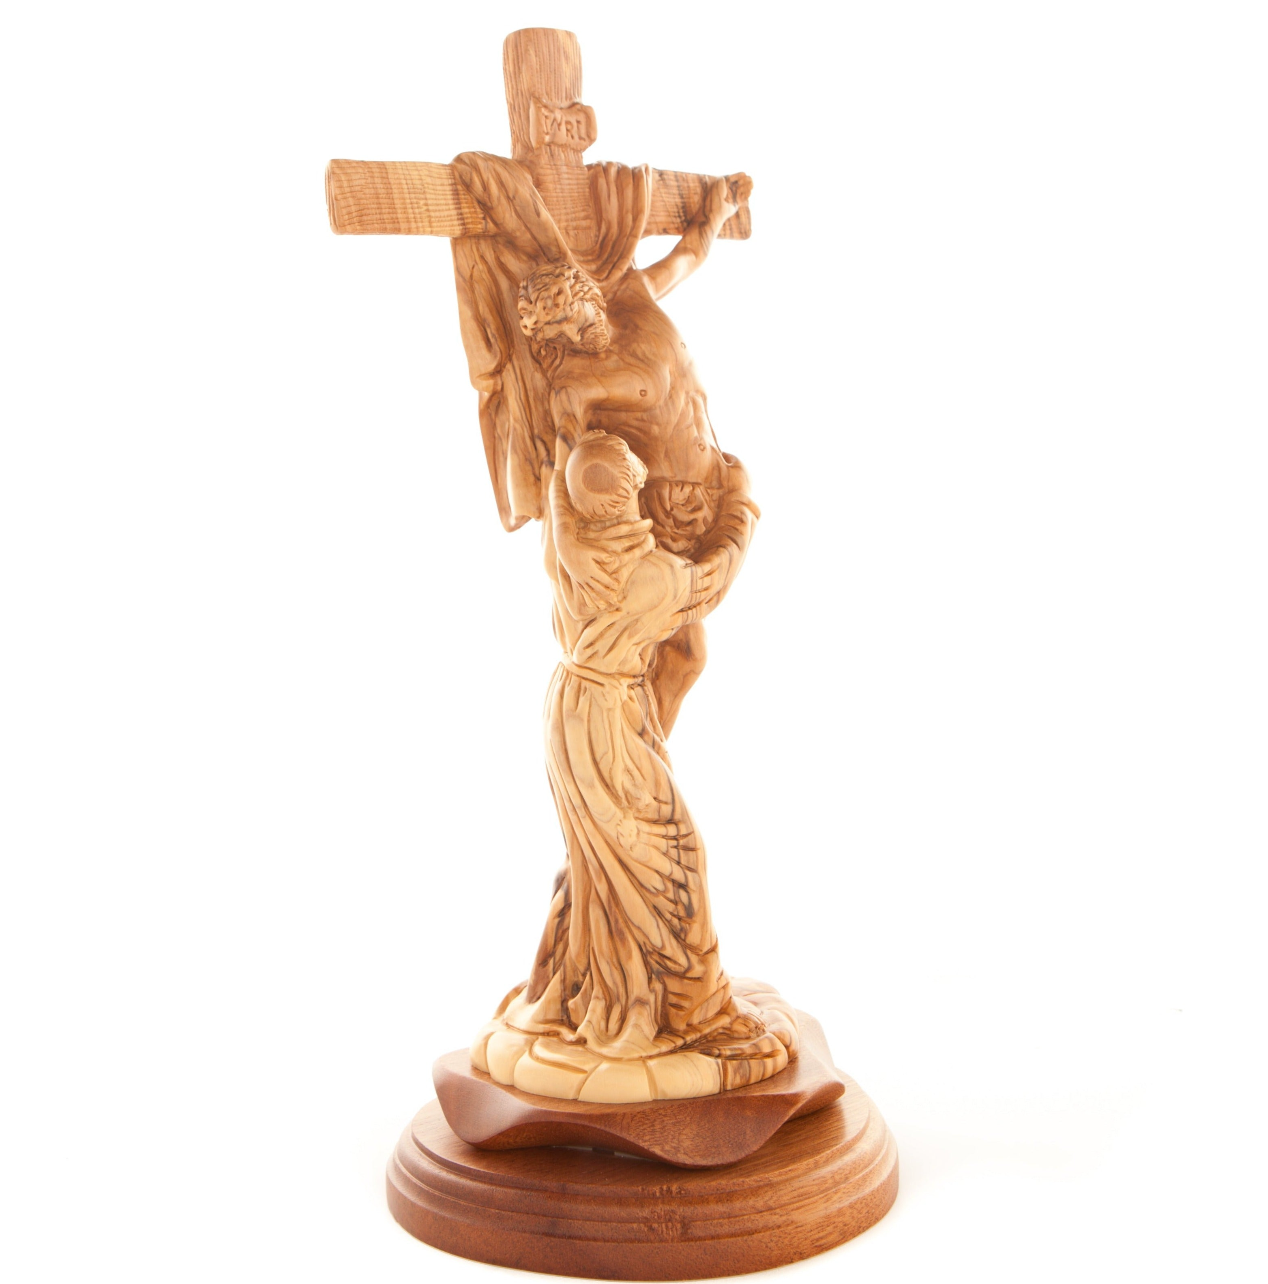 St. Francis of Assisi Embracing the Jesus Christ on Cross Wooden Carved Masterpiece 13.2" Tall, Realistic Hand Carved Sculpture from Holy Land Olive Wood with dark brown grain Mahogany Base 